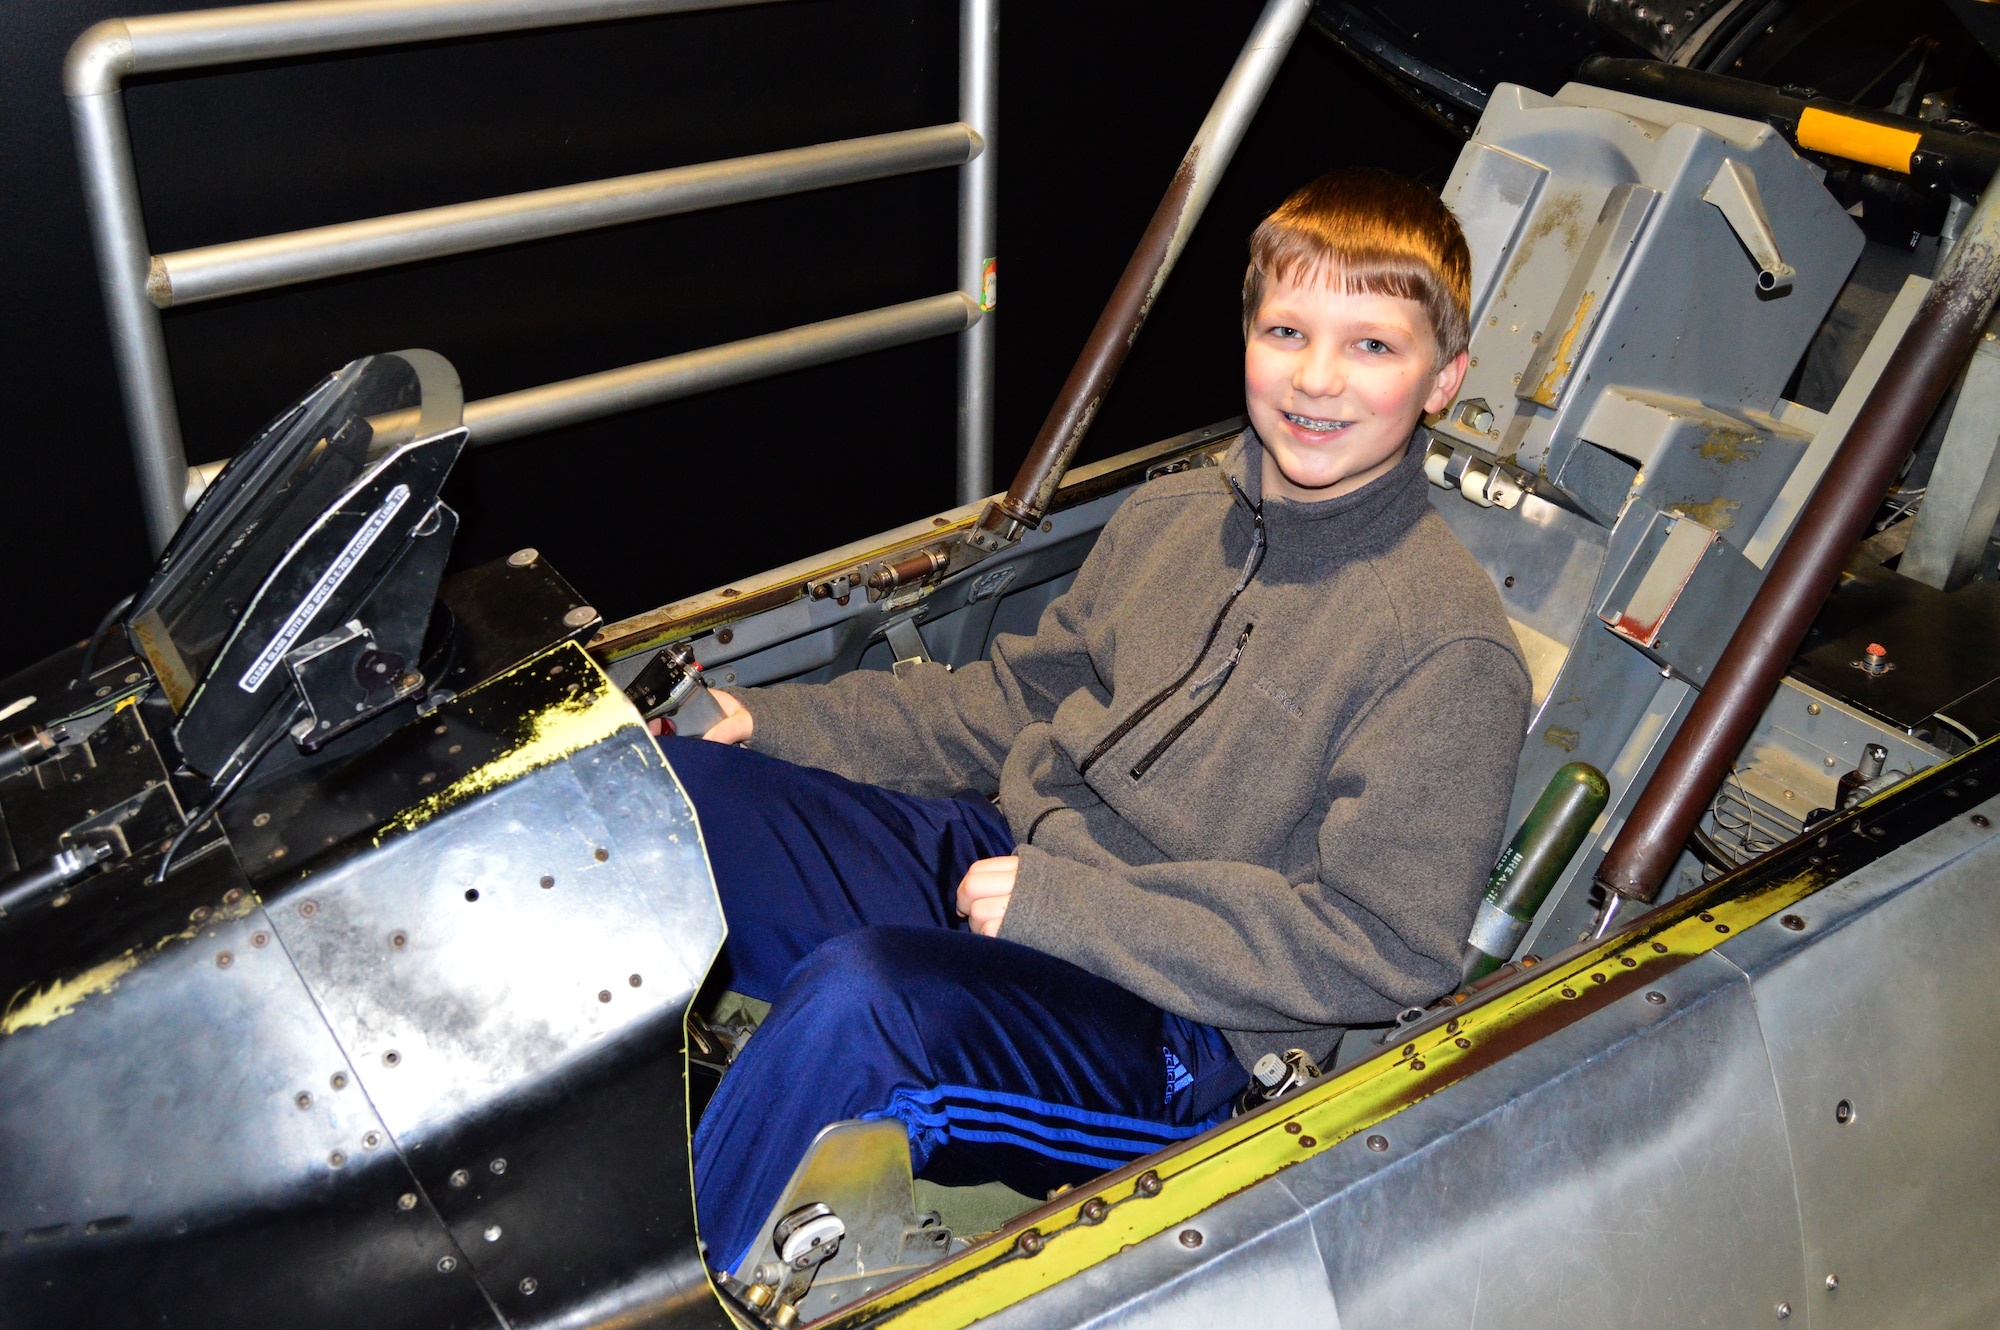 DAYTON, Ohio - A museum visitor enjoying the F-16 Sit-in Cockpit in the Cold War Gallery at the National Museum of the U.S. Air Force. (U.S. Air Force photo)
